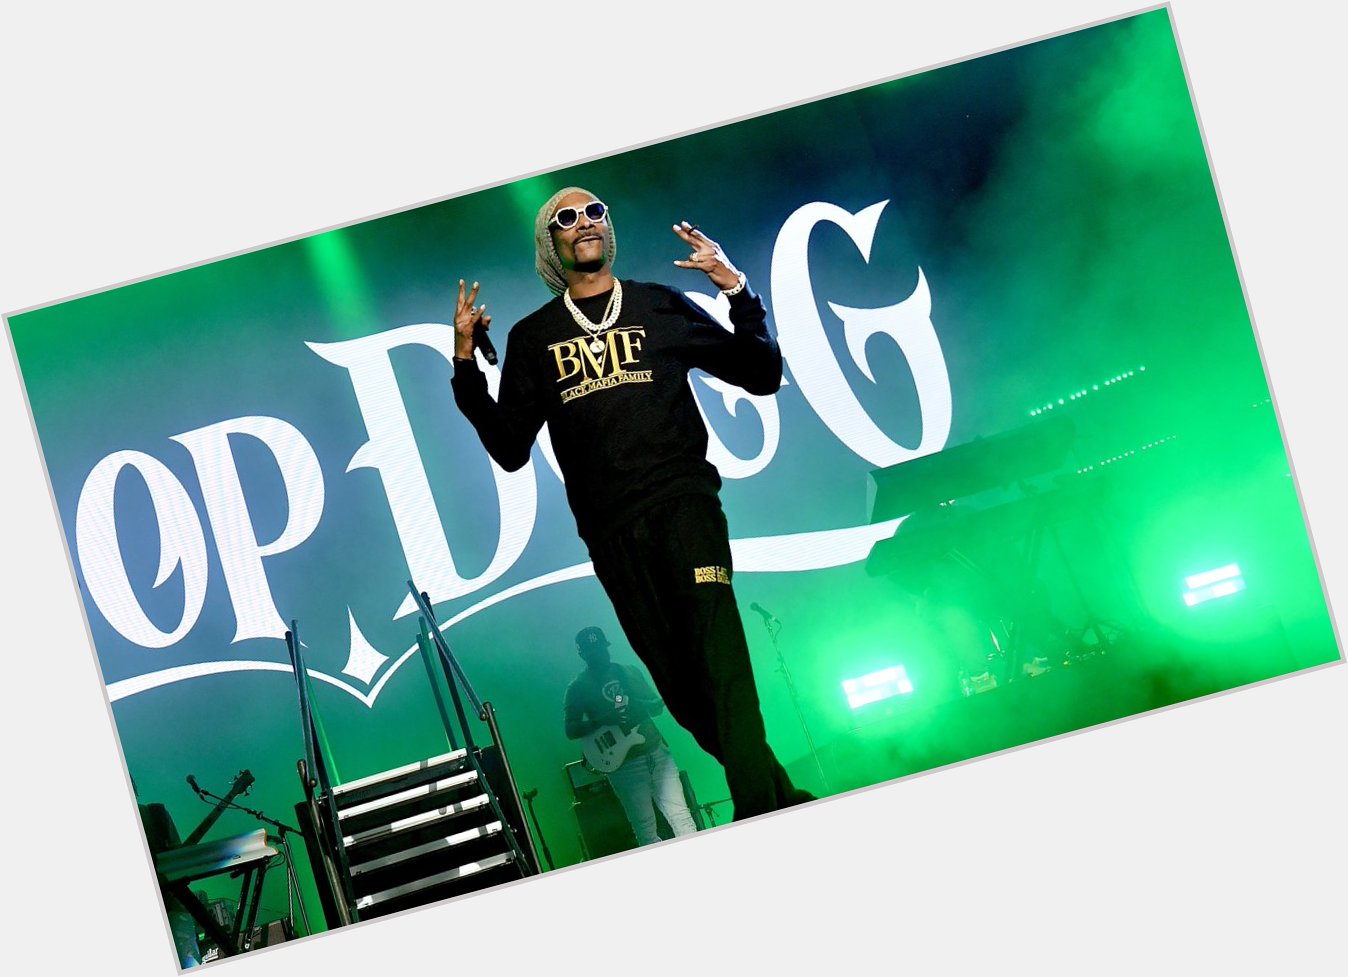 Happy Birthday Snoop Dogg! The rapper, songwriter, media personality, actor and businessman turns 50 today. 